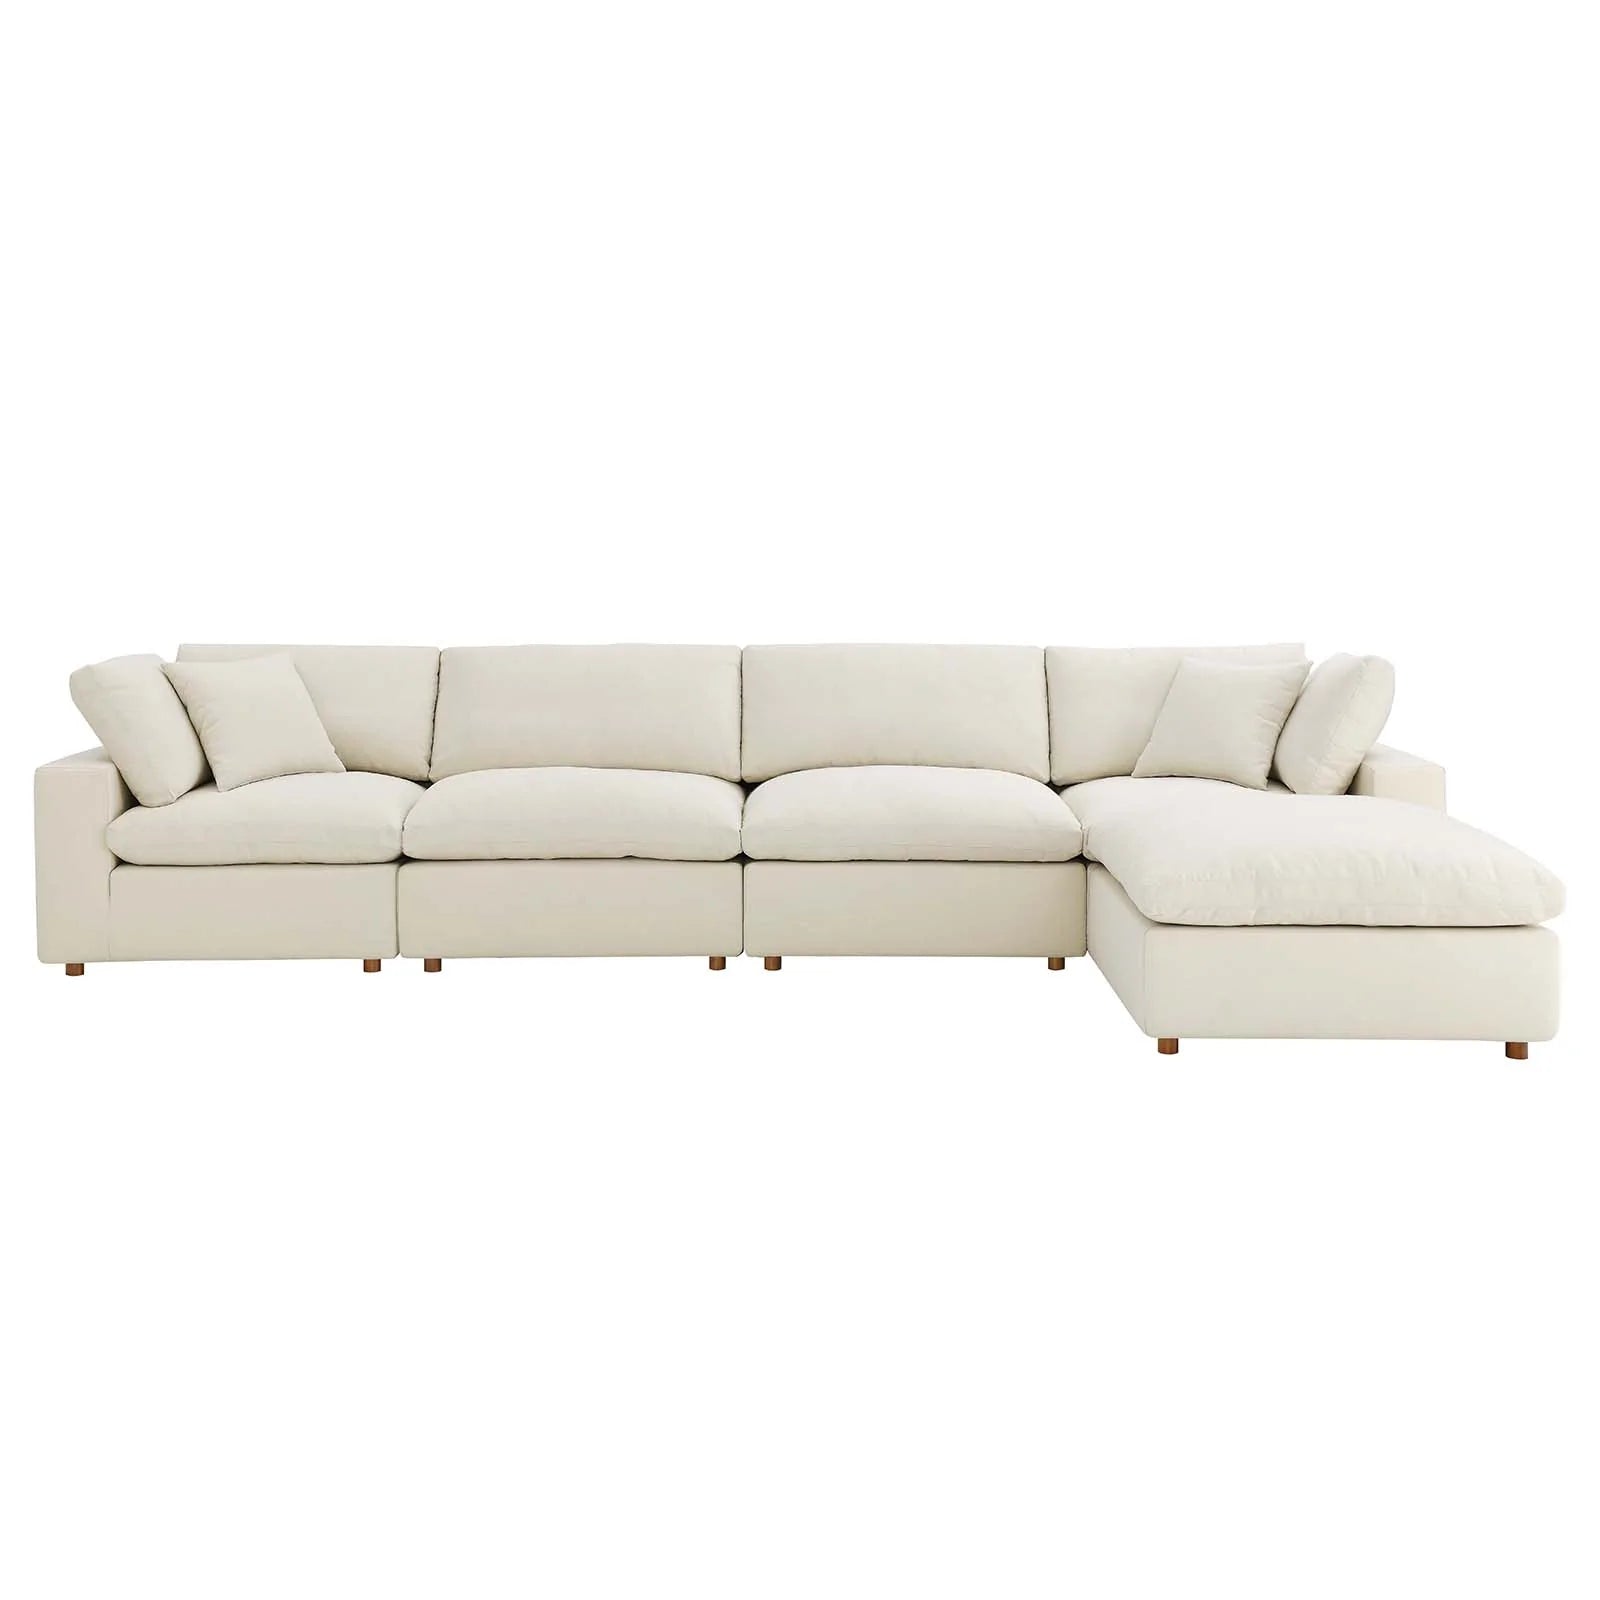 COZY COLLECTION PLUSH MODULAR 5 PIECE EXTENDED SECTIONAL